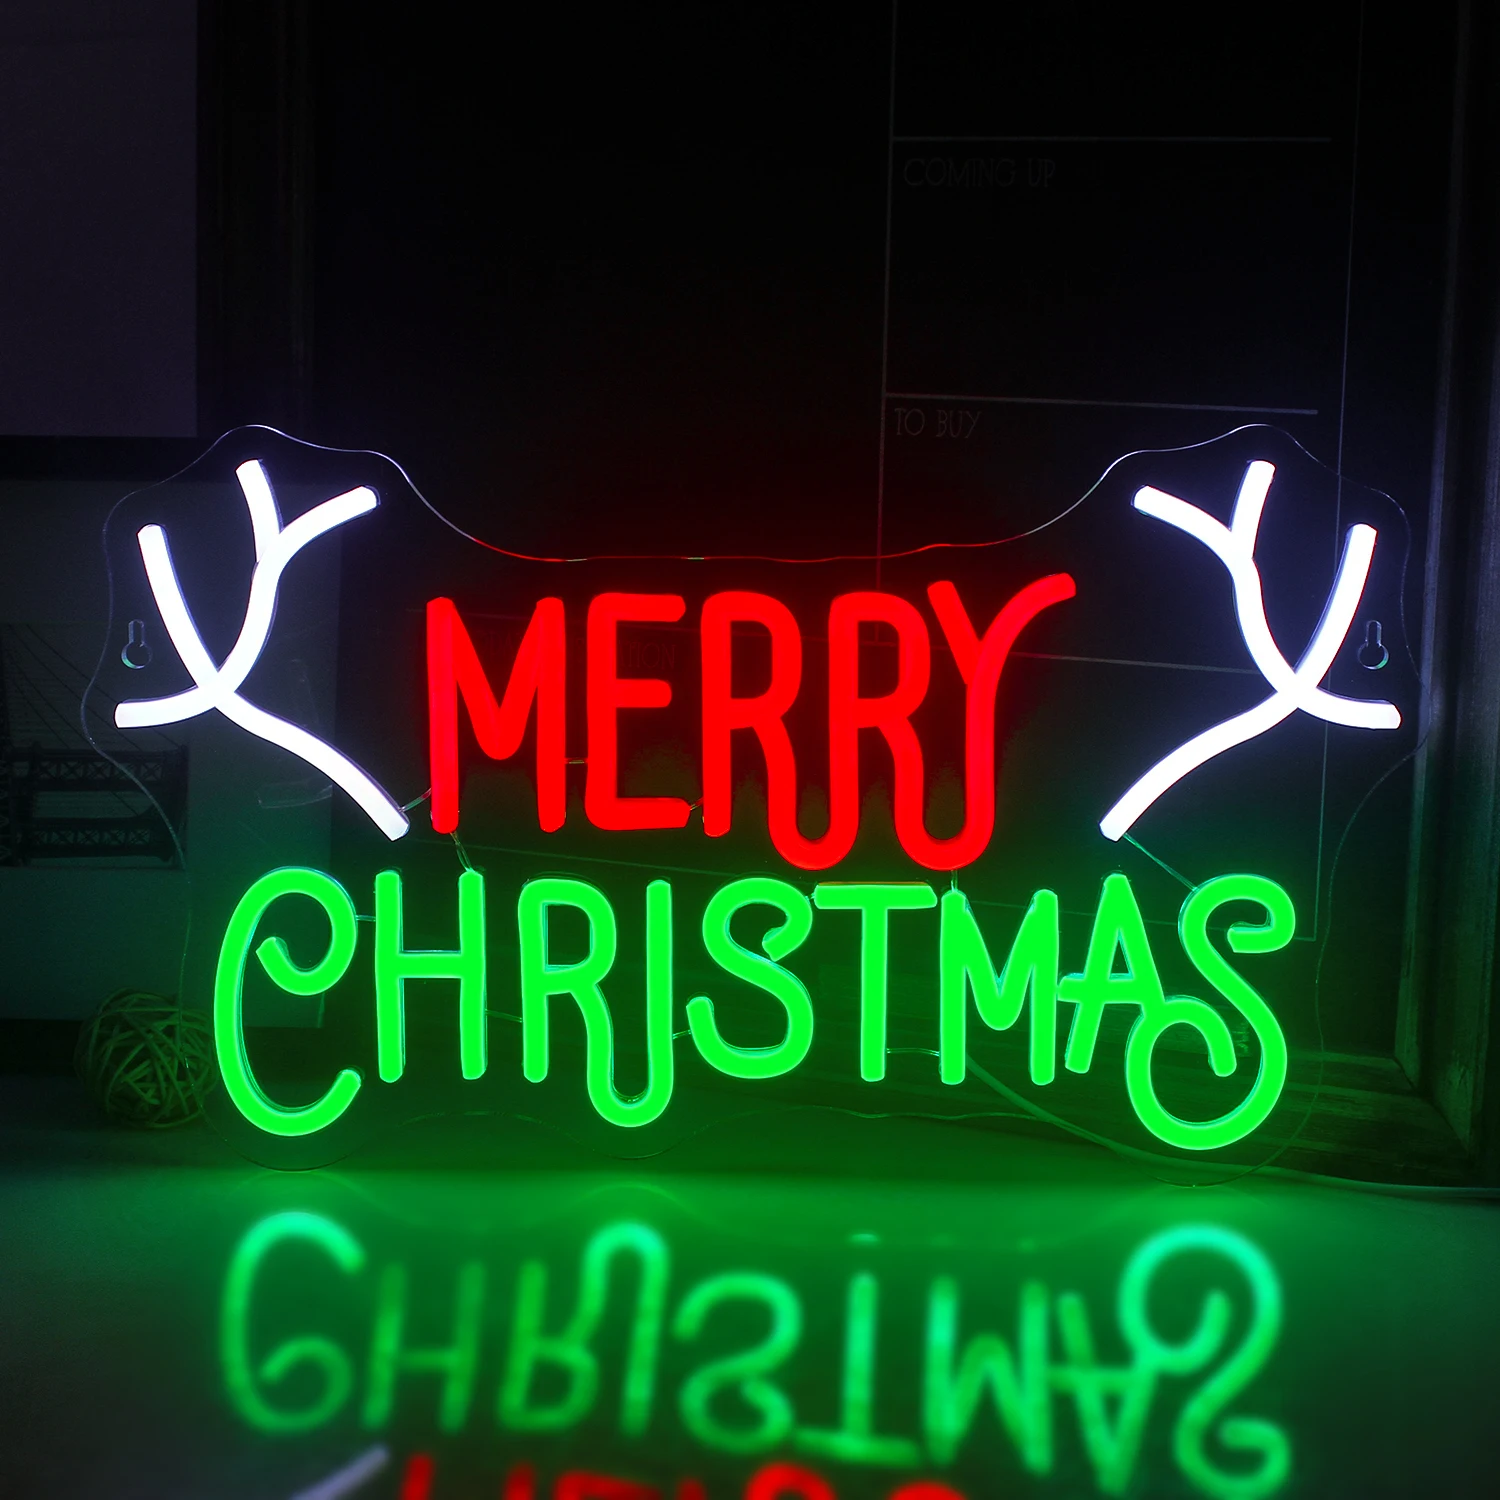 Merry Christmas Neon Sign Led Neon Wall Light Acrylic Board for Christmas Party Supplies Bedroom Wedding Bar Pub Club Christmas solid wood flop display stand event page table sign ordering meal acrylic promotional display supplies coffee shop menu